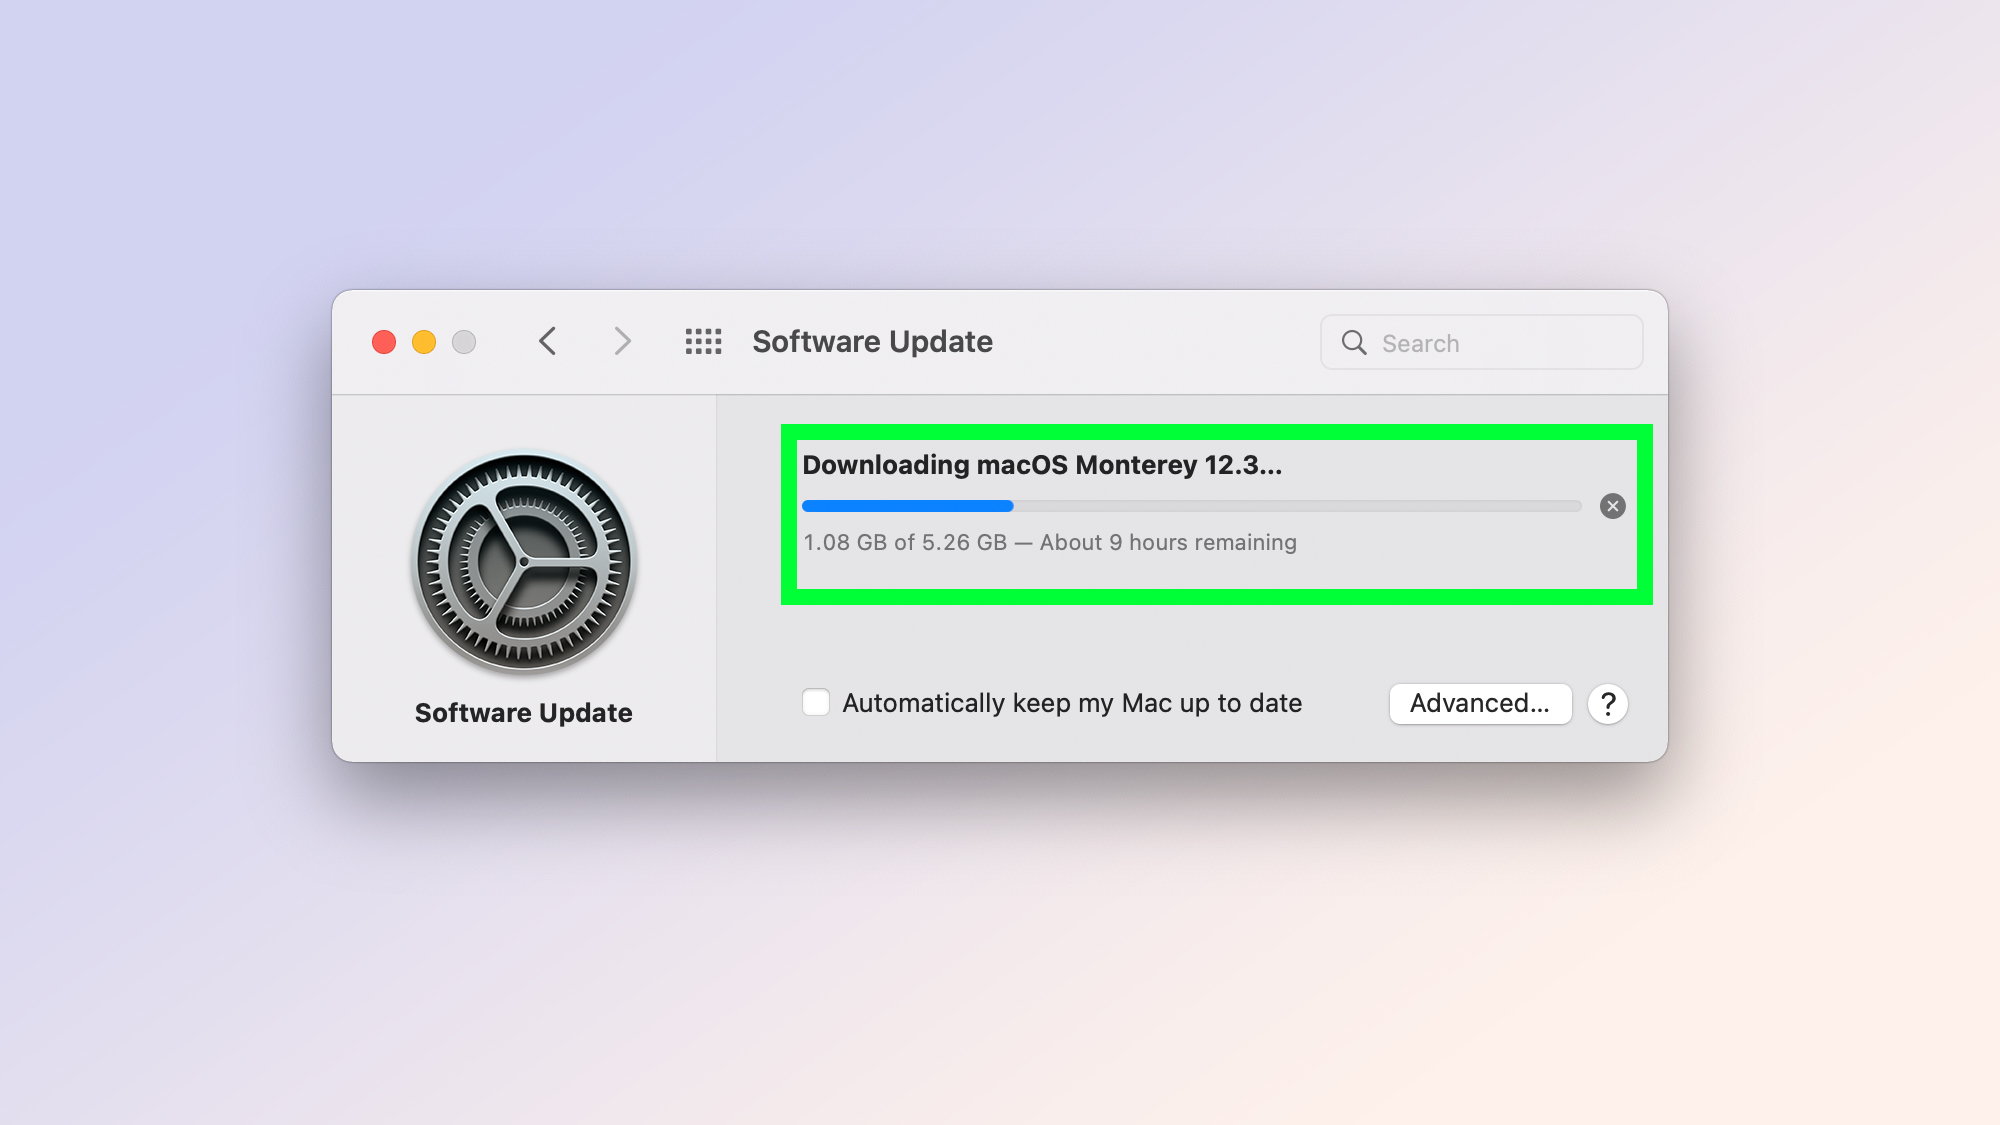 macOS 12.3 download started at Software Update